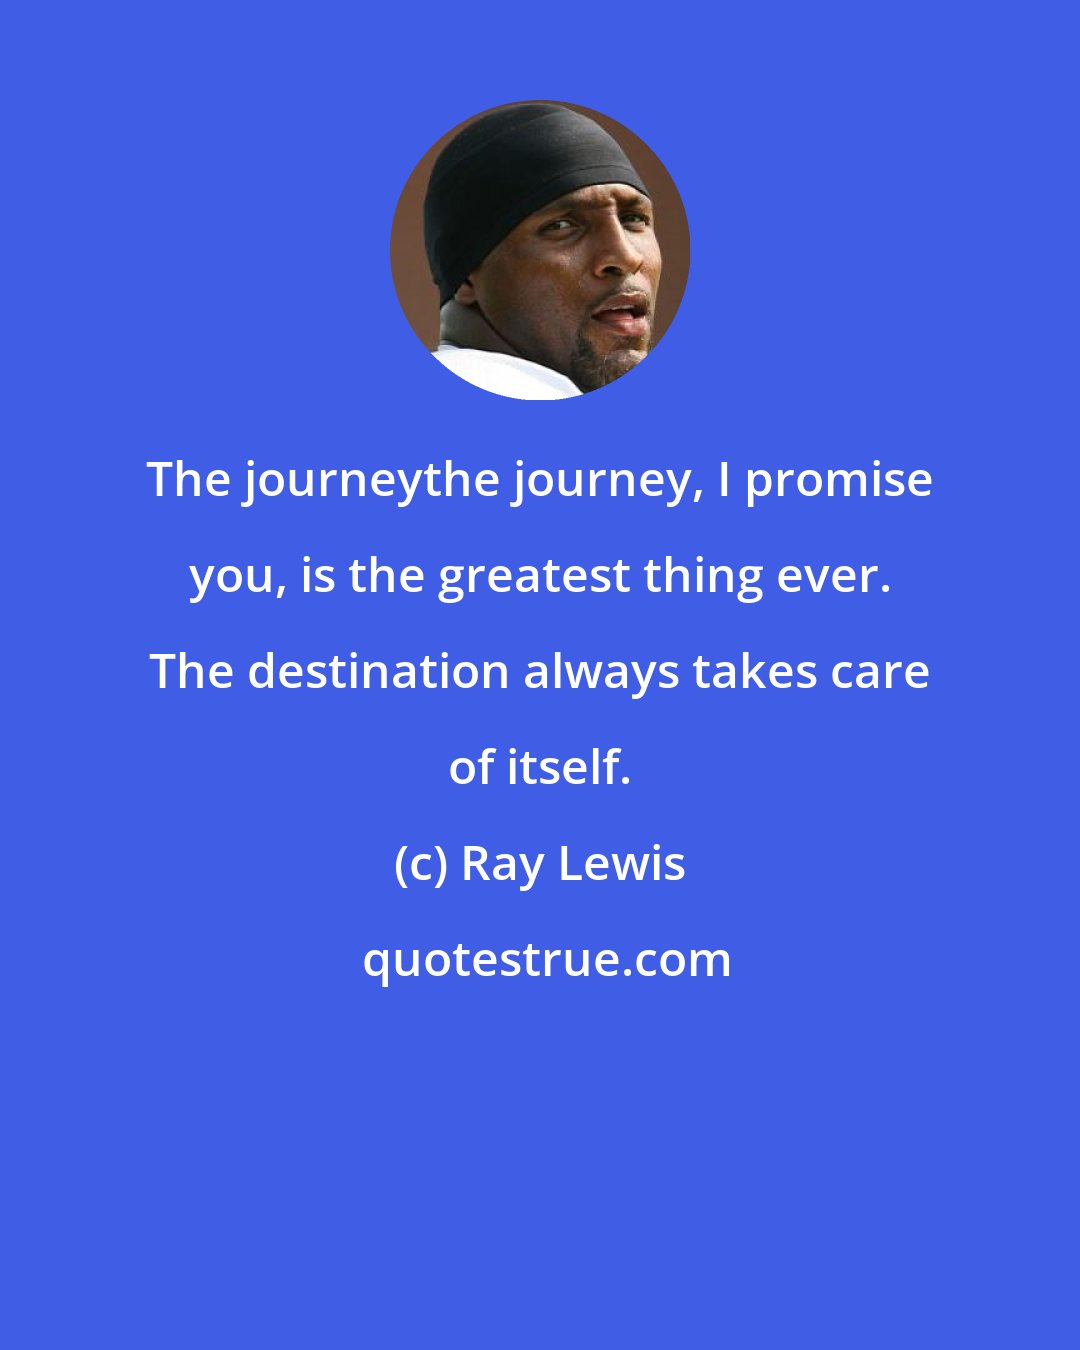 Ray Lewis: The journeythe journey, I promise you, is the greatest thing ever. The destination always takes care of itself.